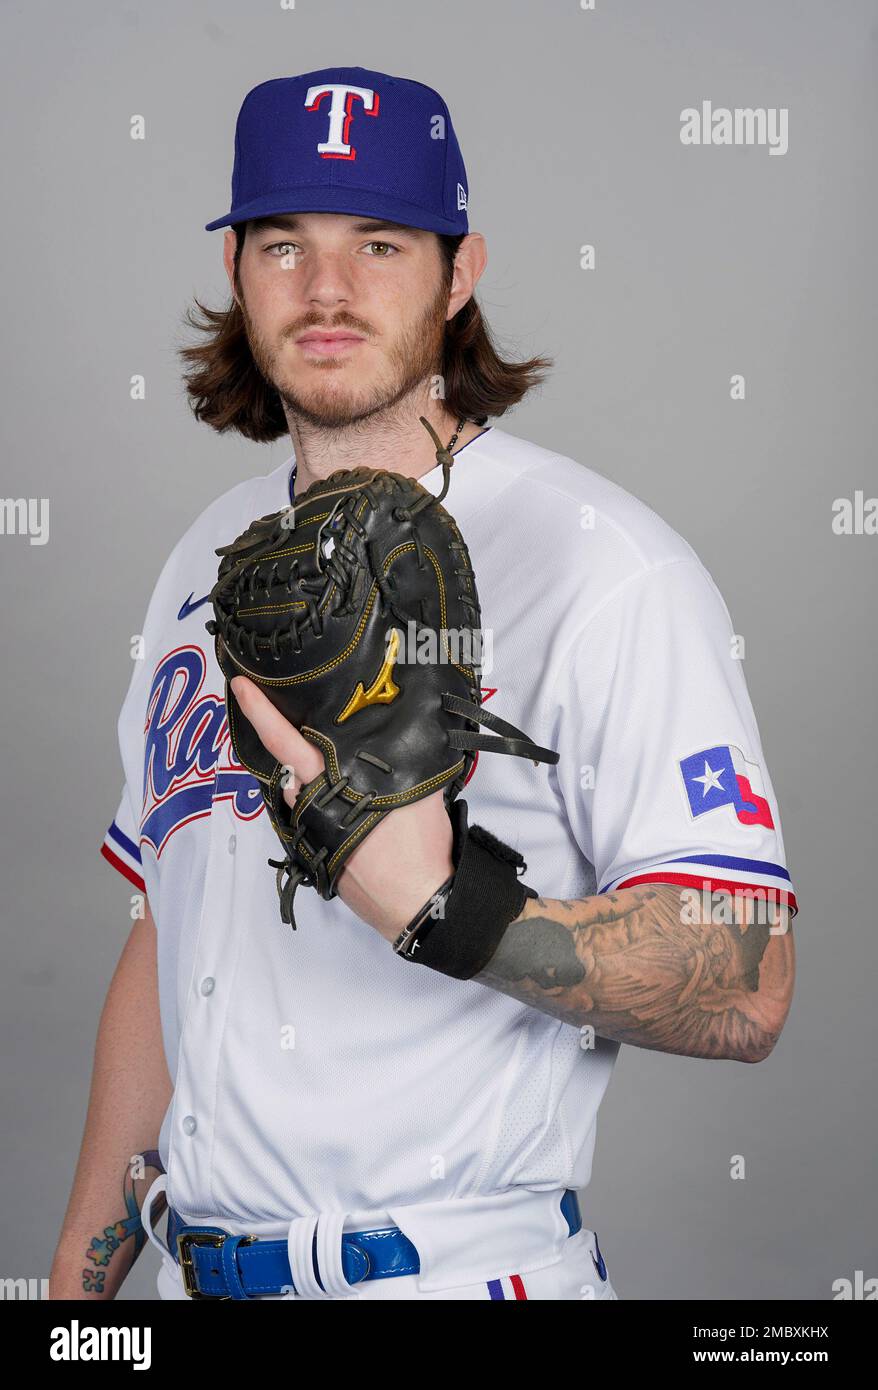 This is a 2022 photo of Jonah Heim of the Texas Rangers' baseball